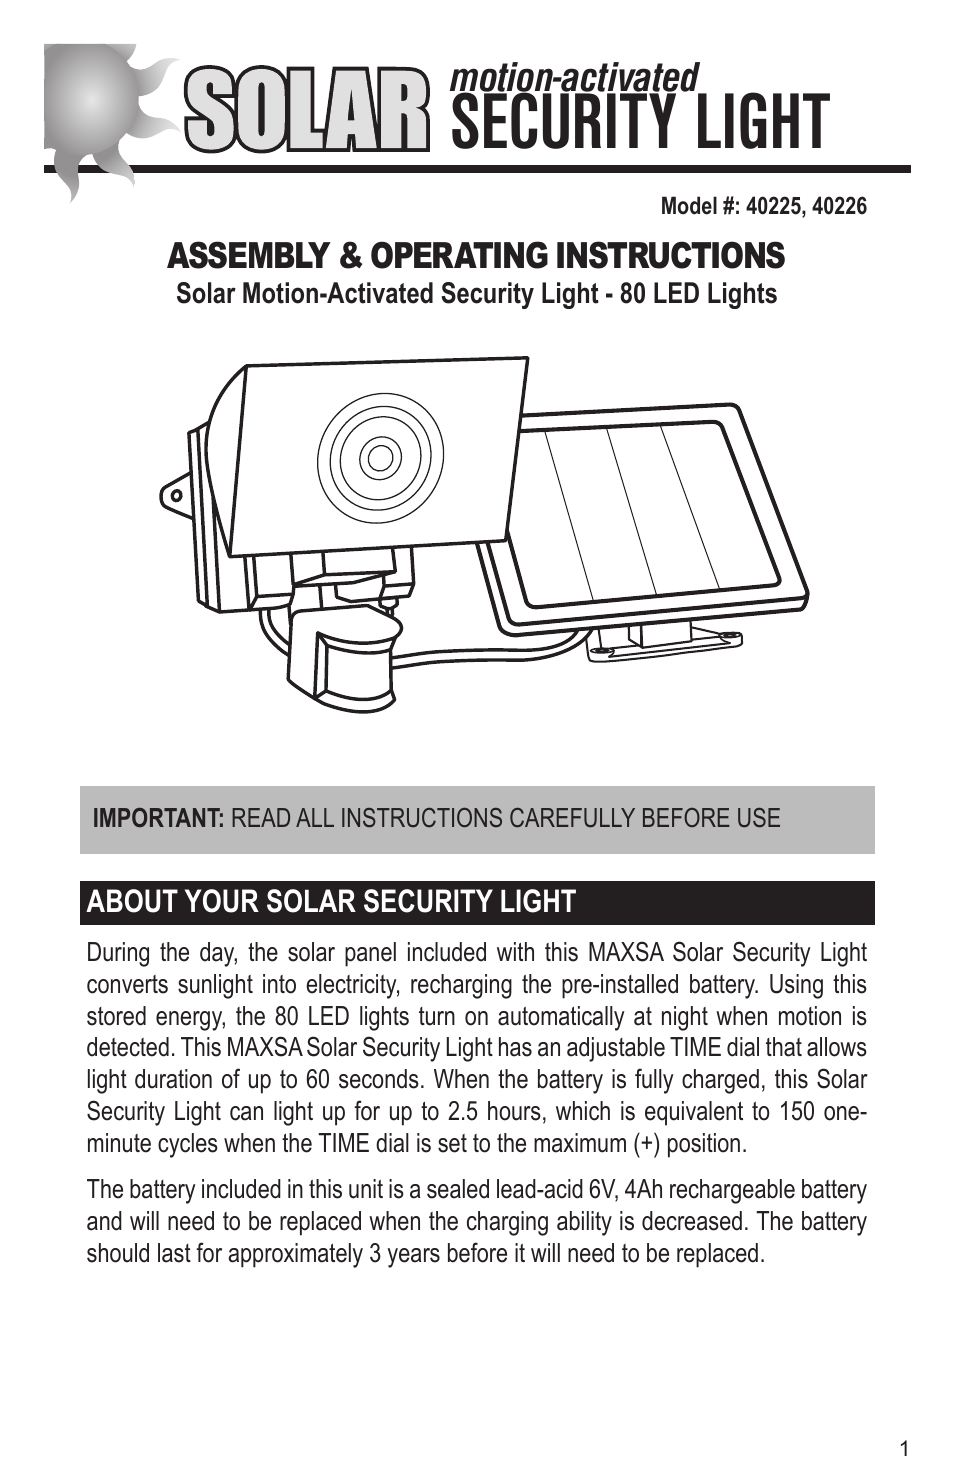 Solar-Powered Motion-Activated 80 LED Security Floodlight